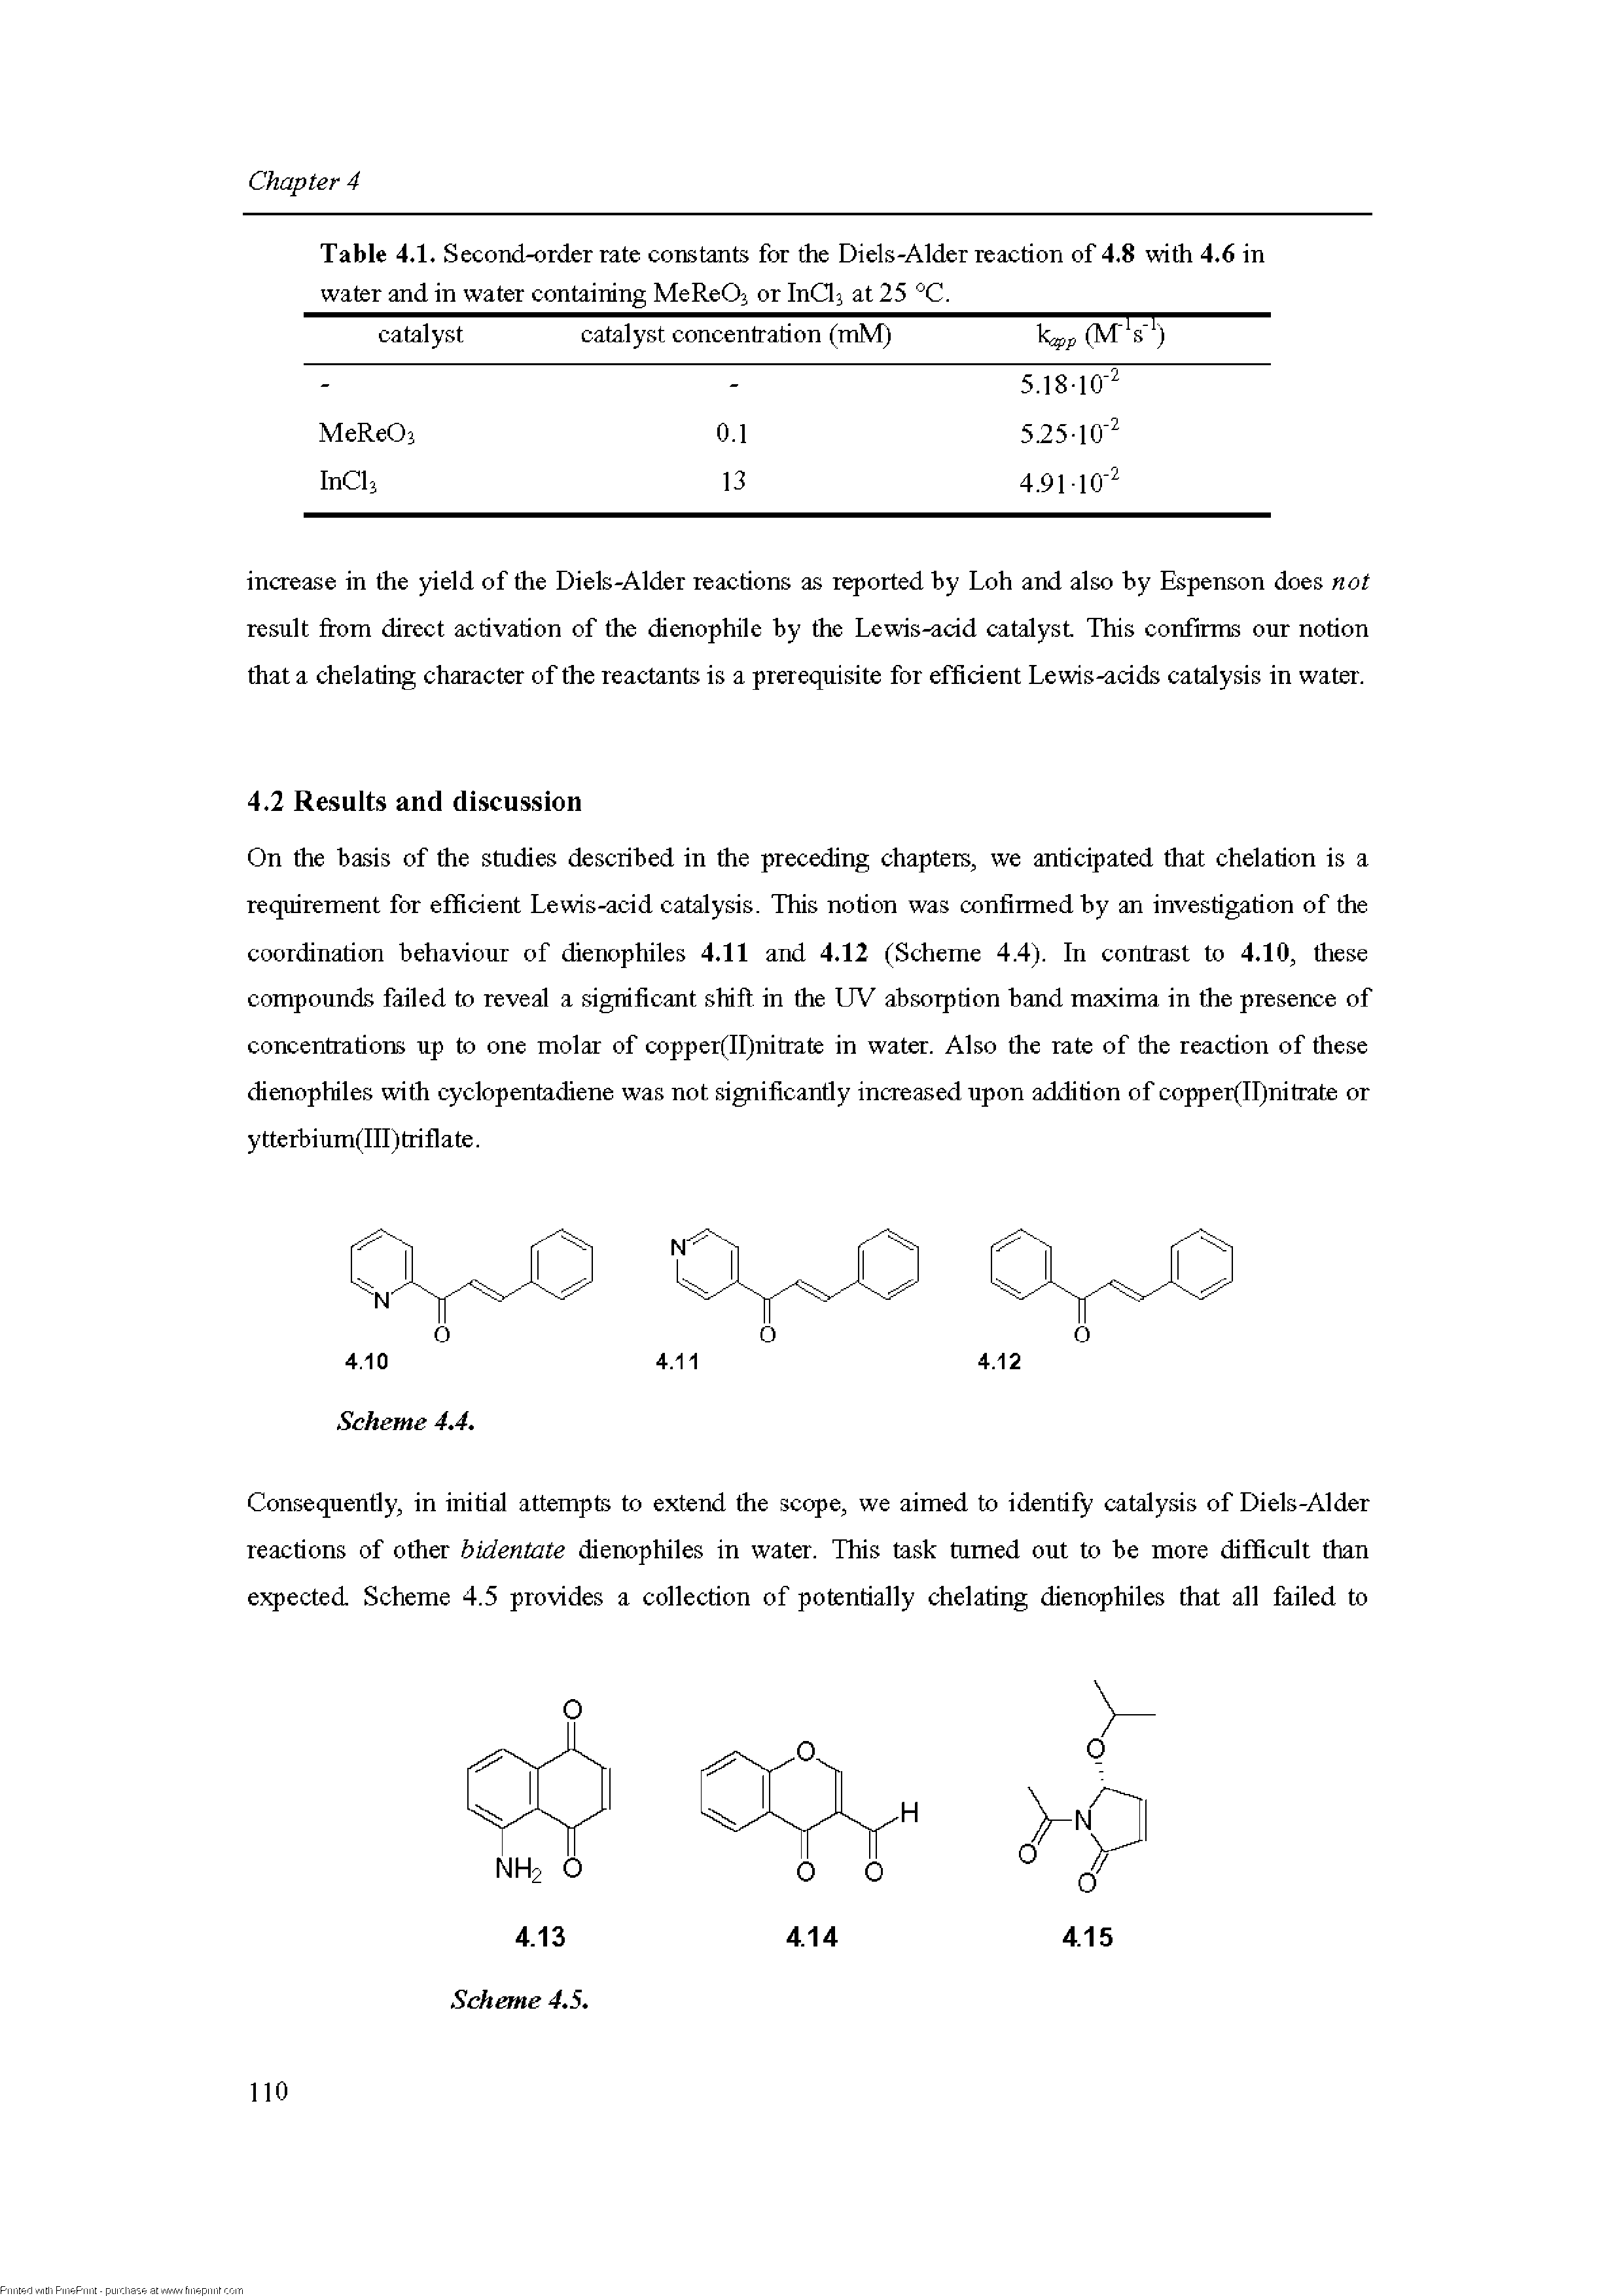 Table 4.1. Second-order rate constants for the Diels-Alder reaction of 4.8 with 4.6 in water and in water containing MeReOj or InQj at 25 °C.